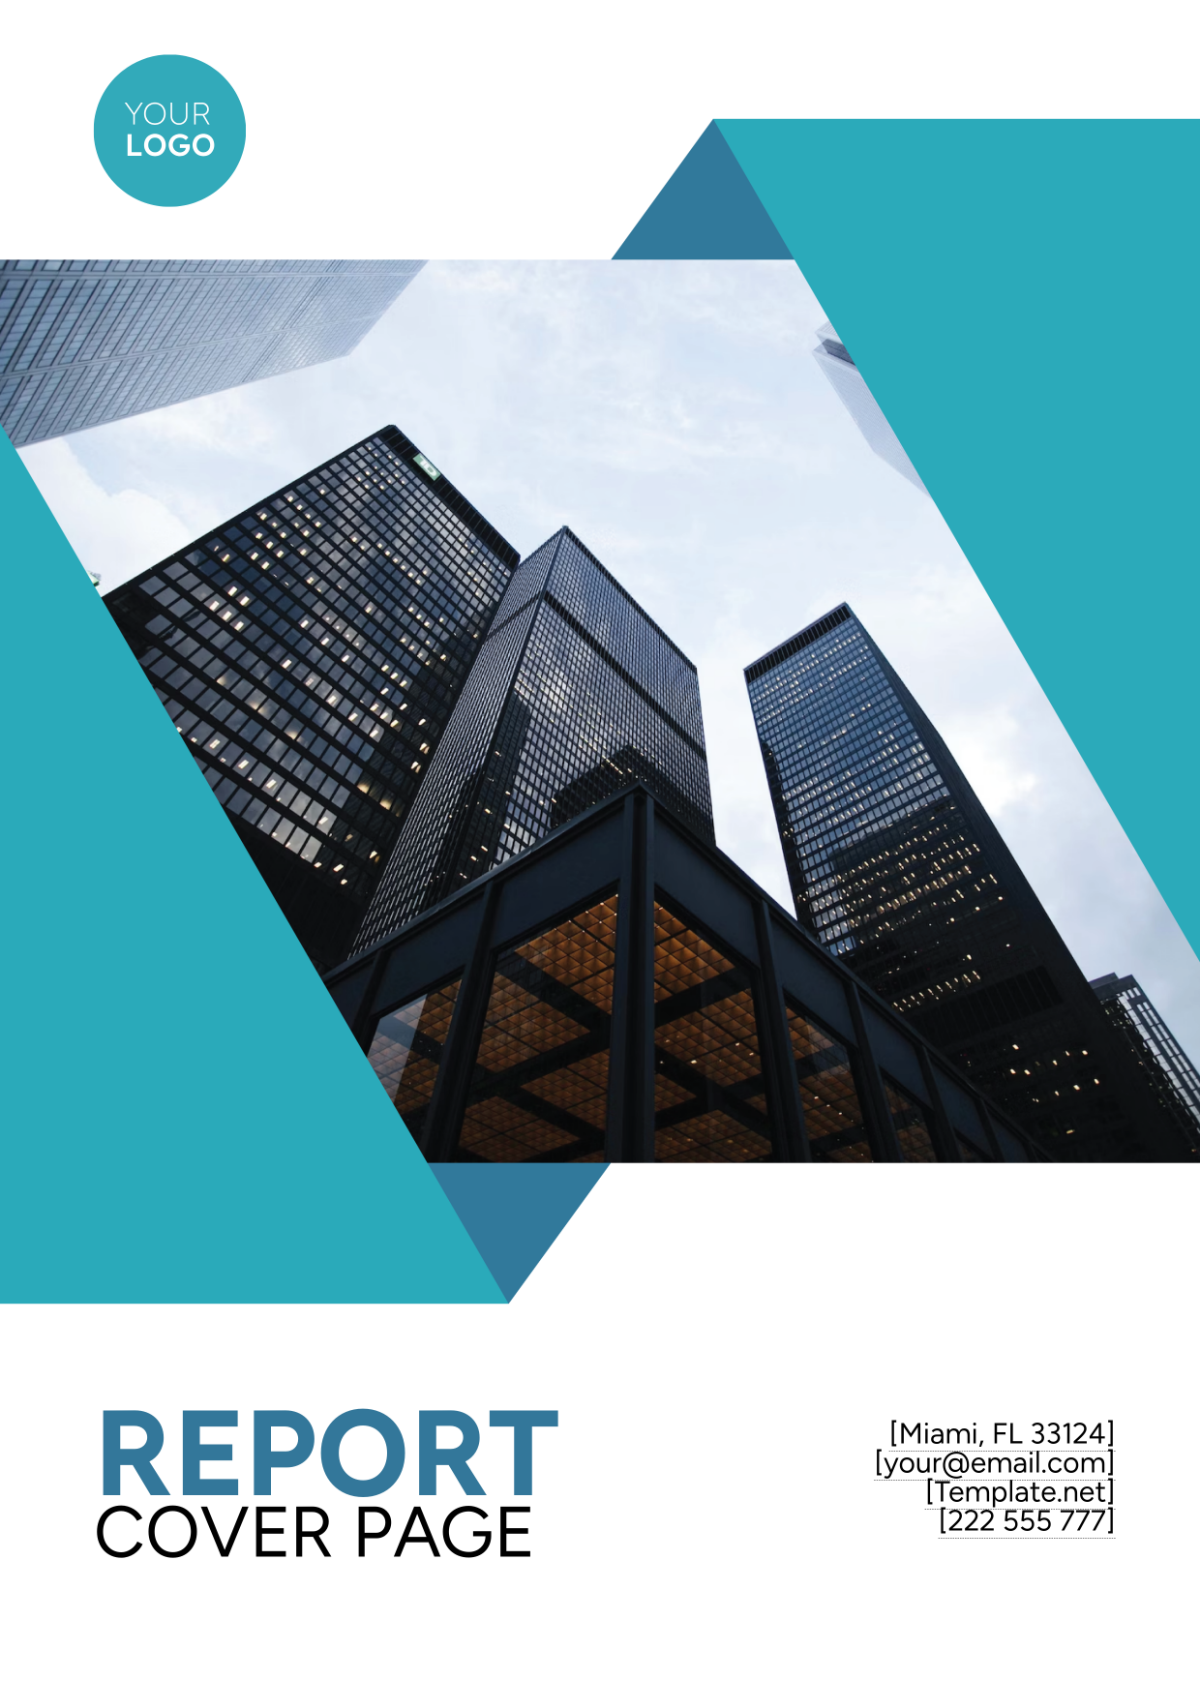 Report Cover Page Template - Edit Online & Download Example | Template.net